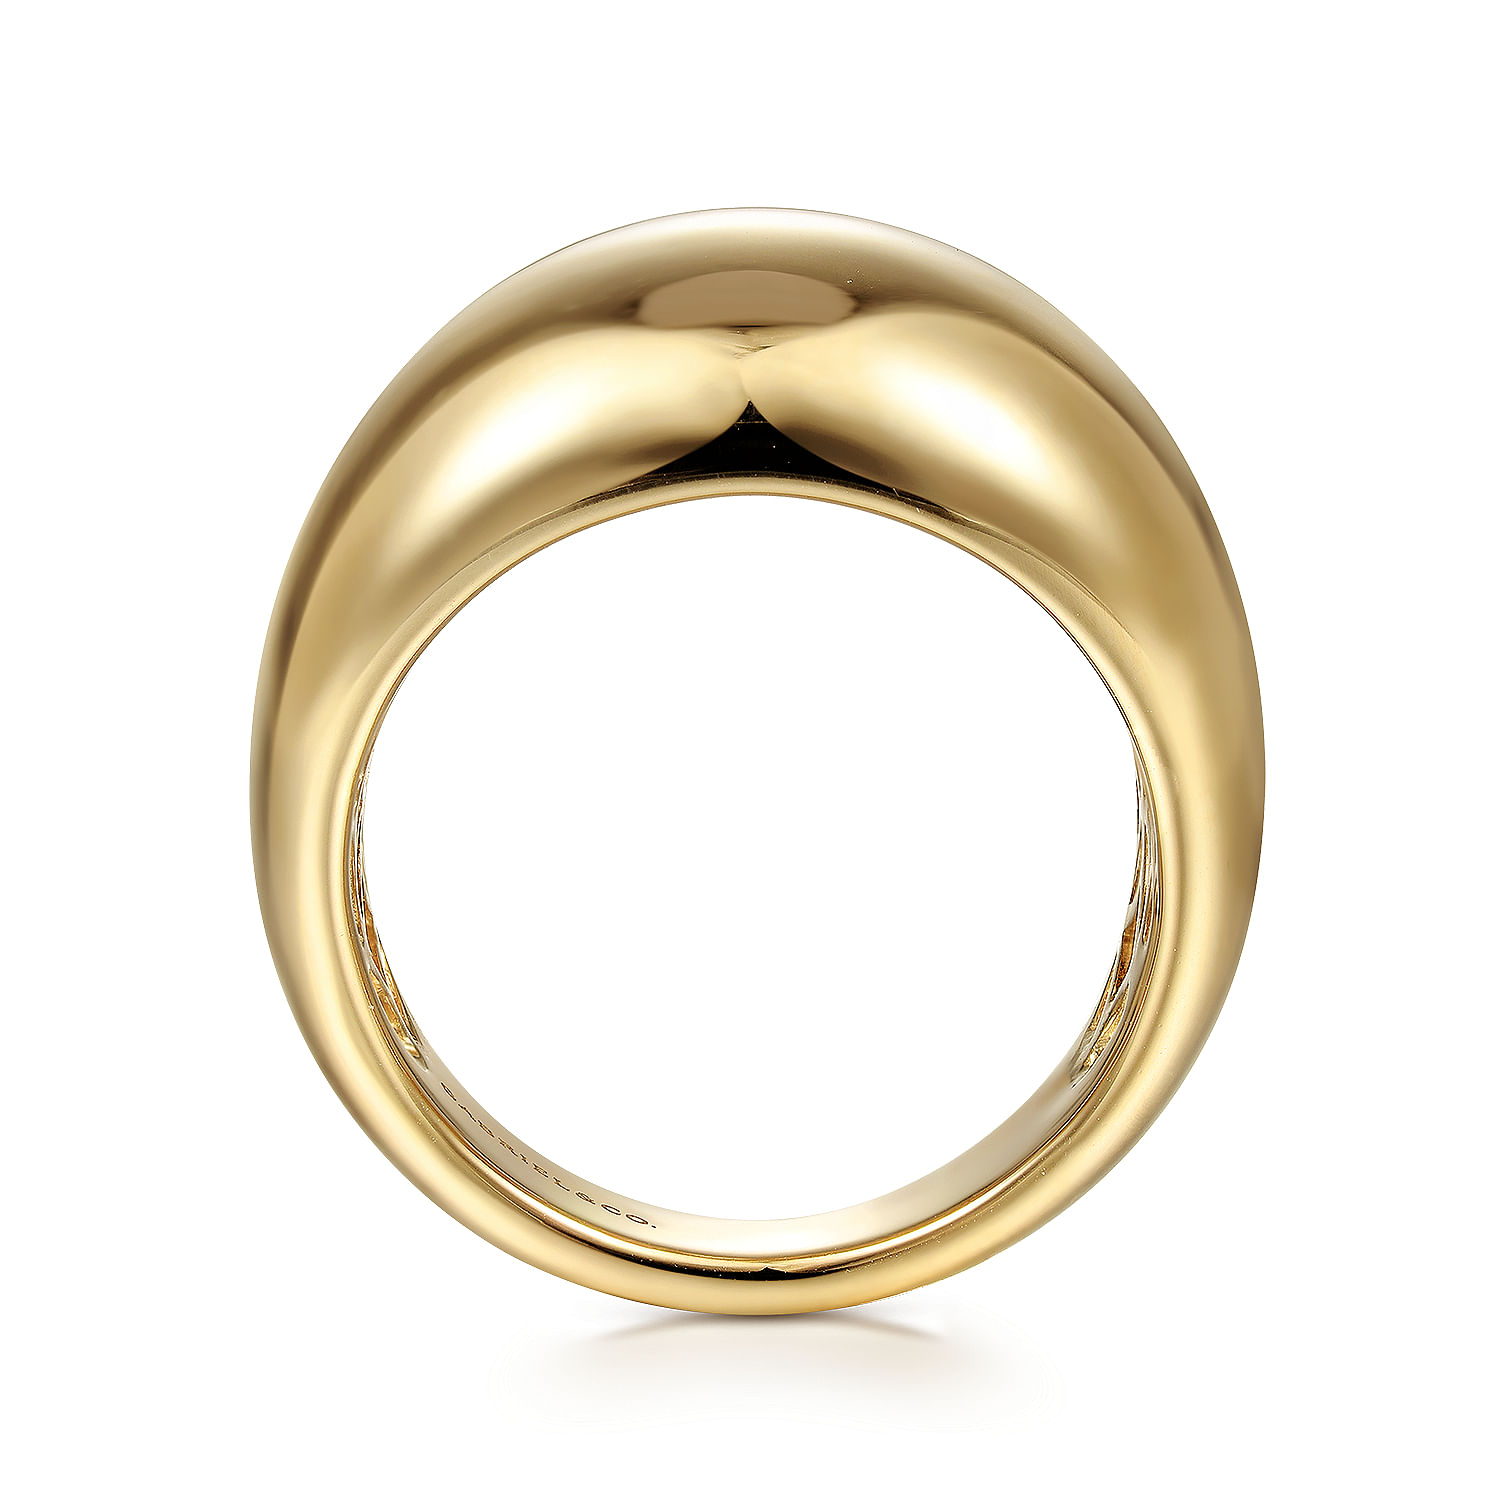 14K Yellow Gold High Polished Dome Ring